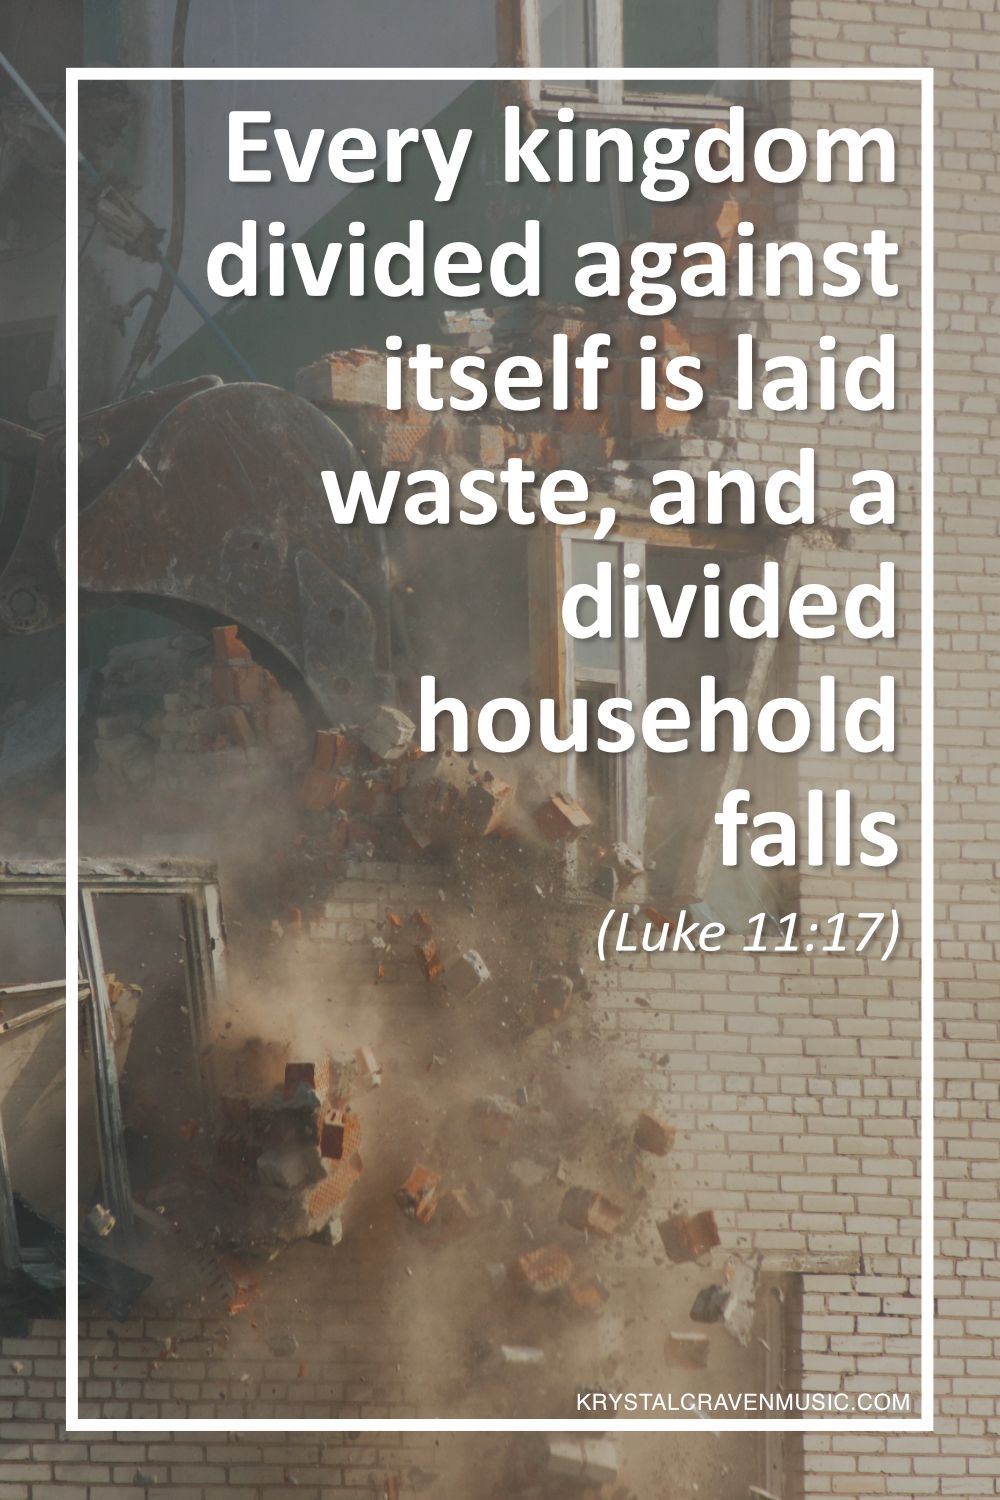 The text from Luke 11:17 "Every kingdom divided against itself is laid waste, and a divided household falls" overlaying a collapsing brick building.